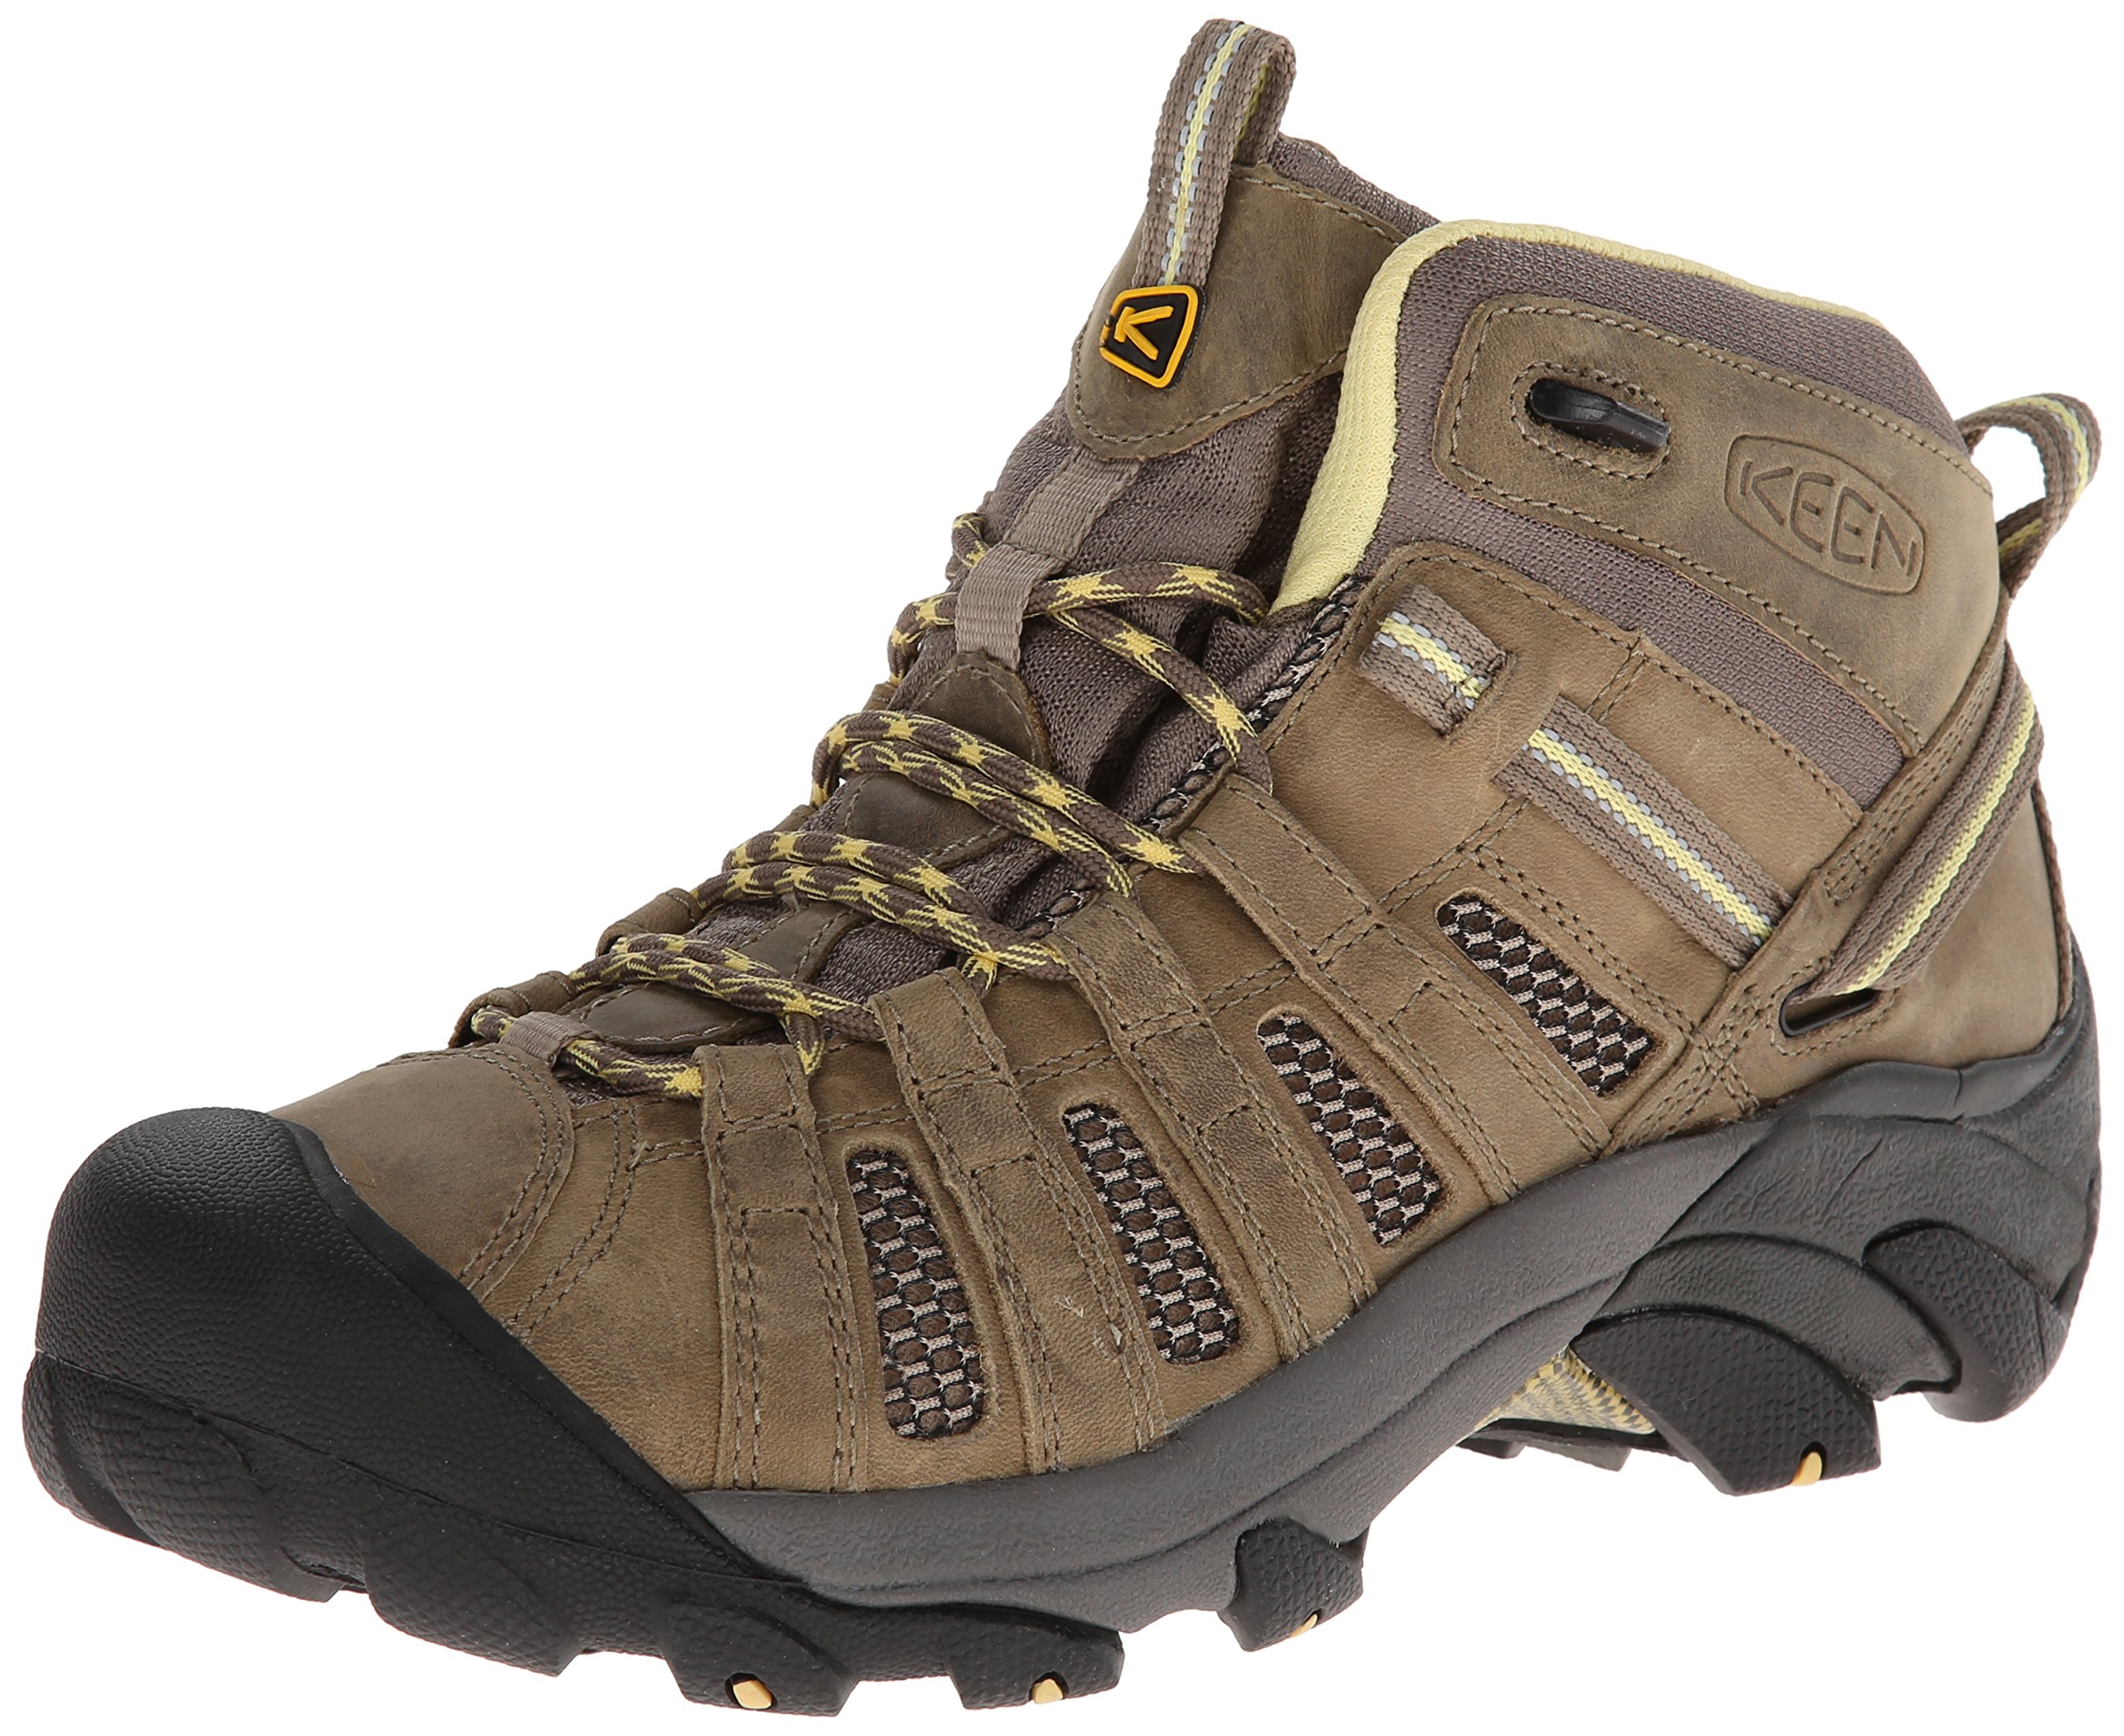 Keen Women's Voyageur Mid Height Hiking Boots from $63.34 + Free Shipping